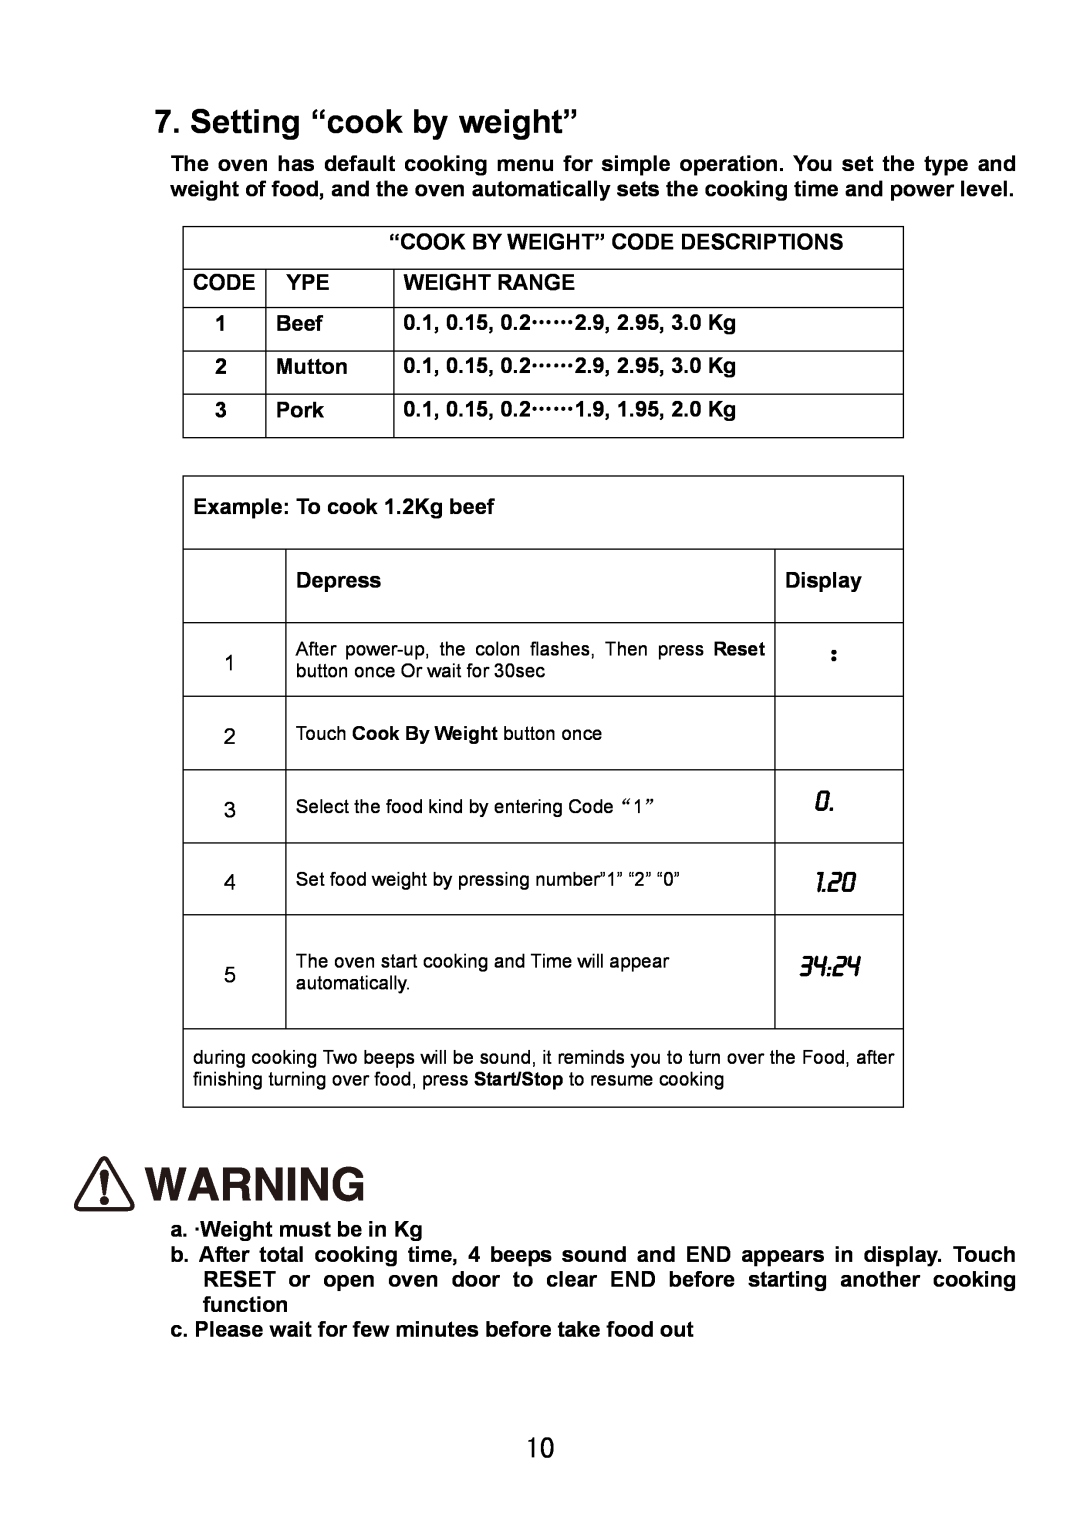 Haier HDM-2070EG manual Setting “cook by weight”, 3424, 1.20, Code 